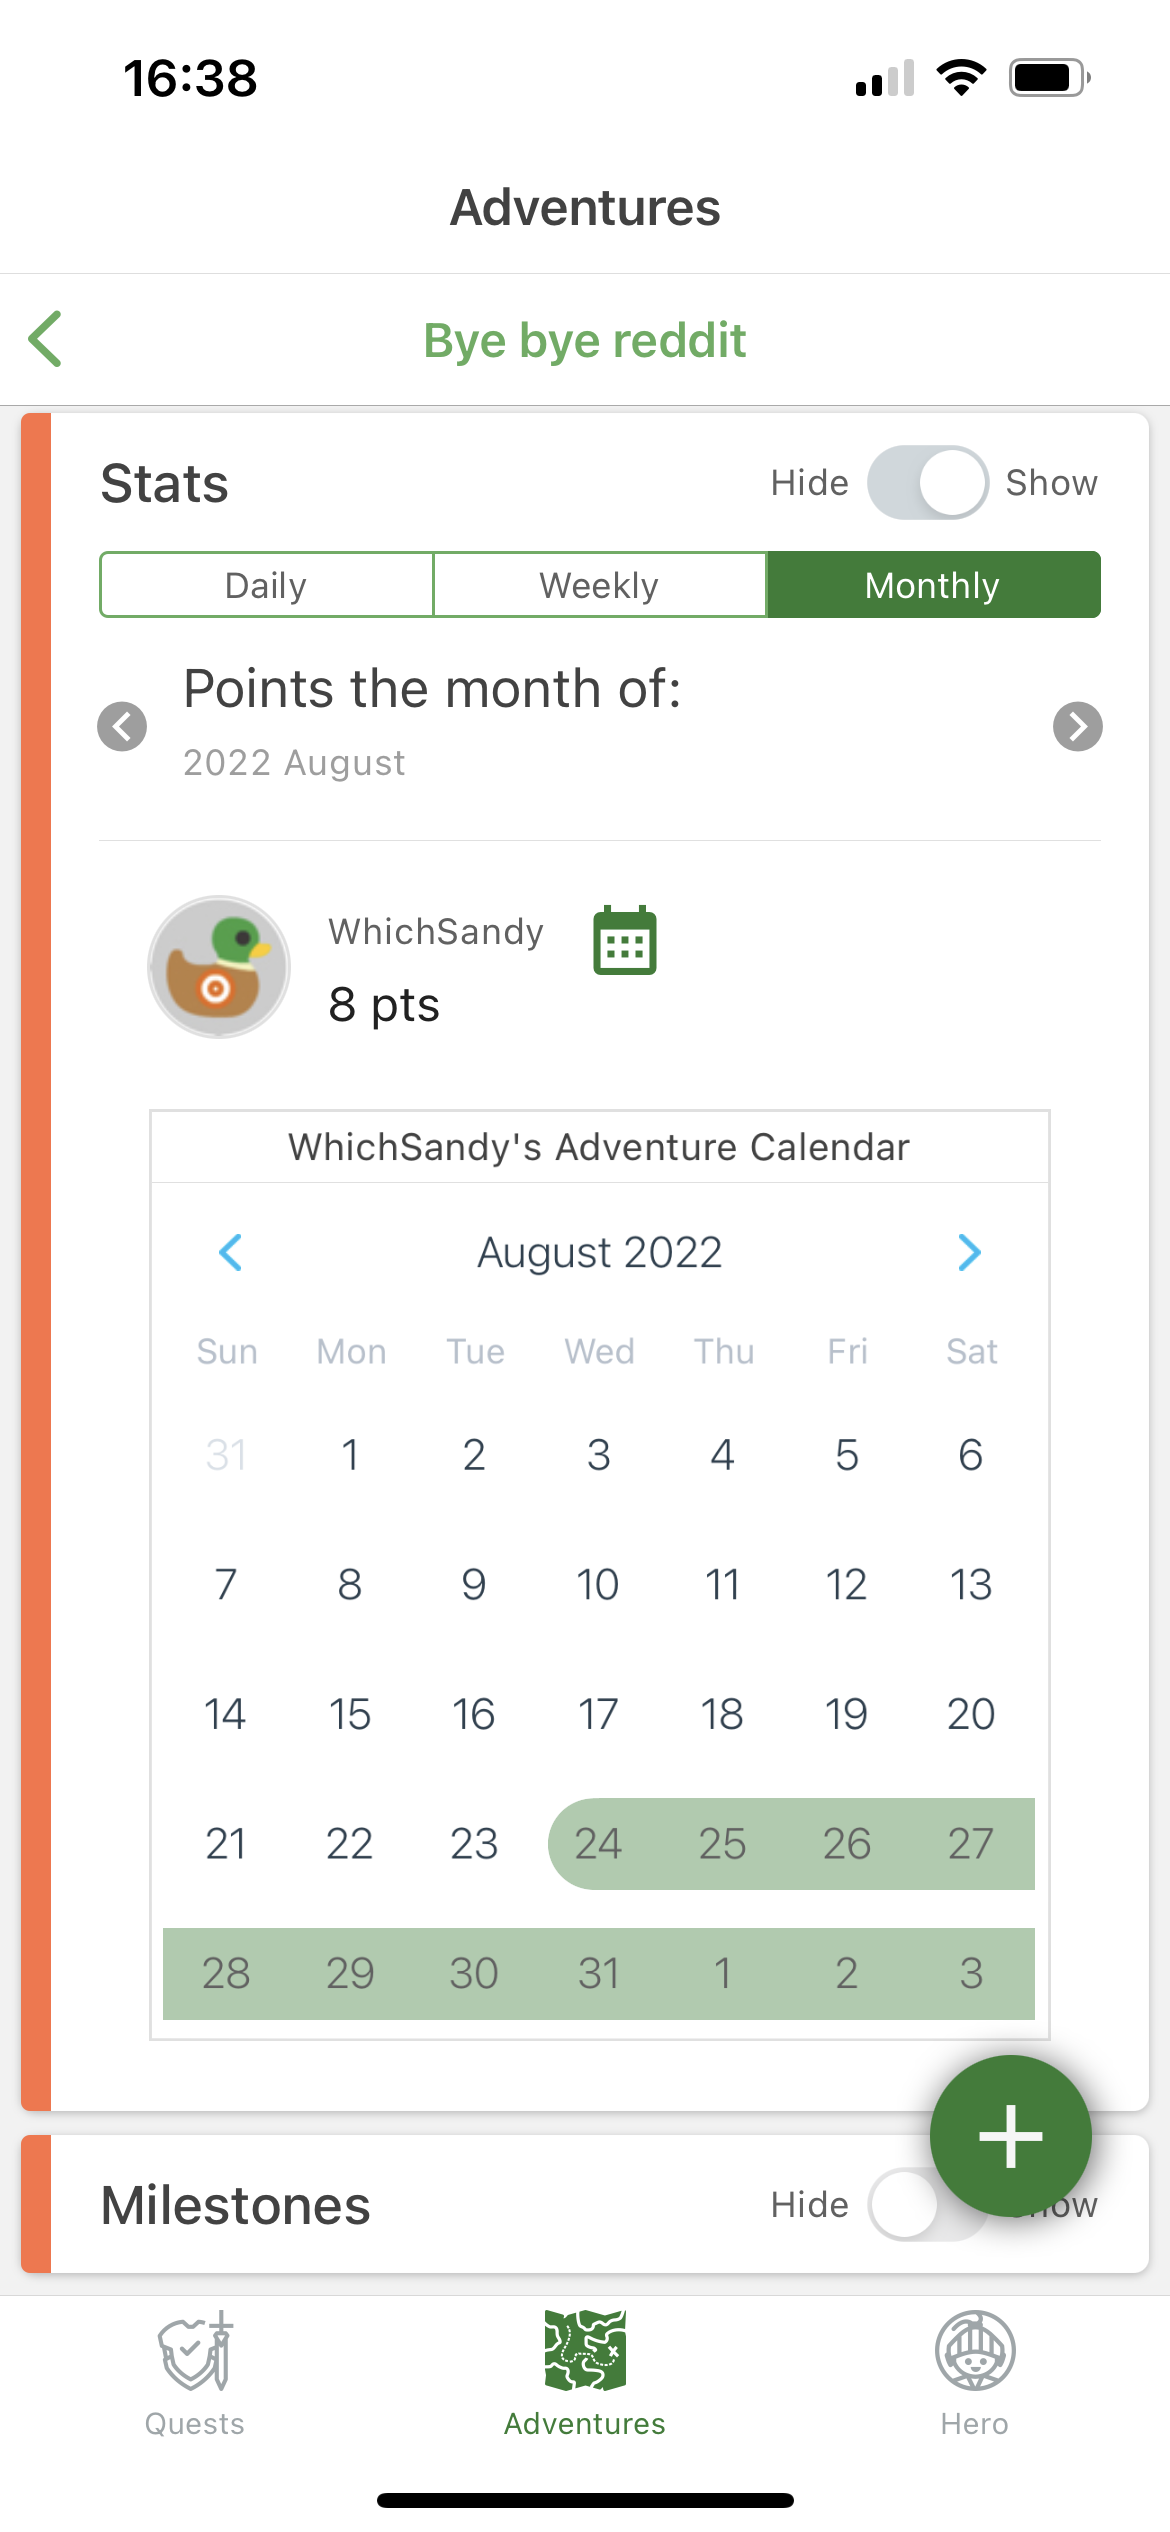 i was able to quit a bad habit after the release of heromode v2, thanks to the activity calendars